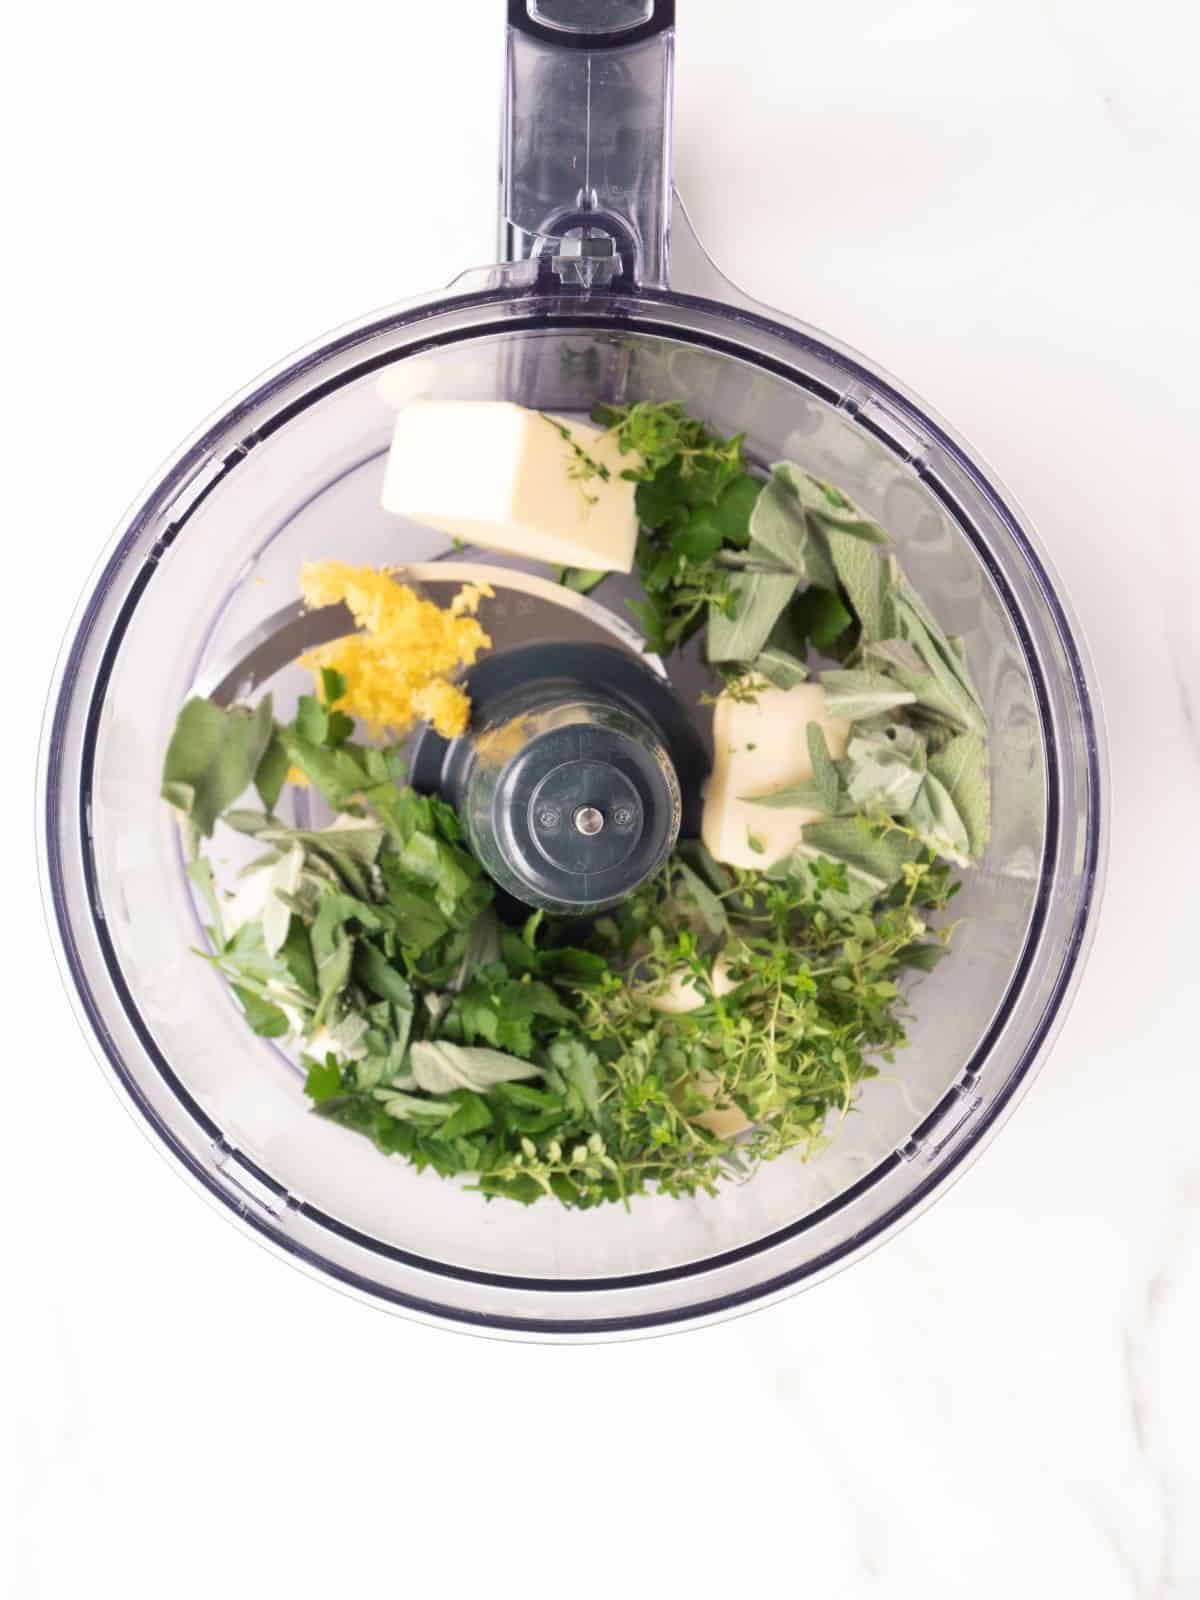 A food processor with butter and a mix of herbs to make compound butter.